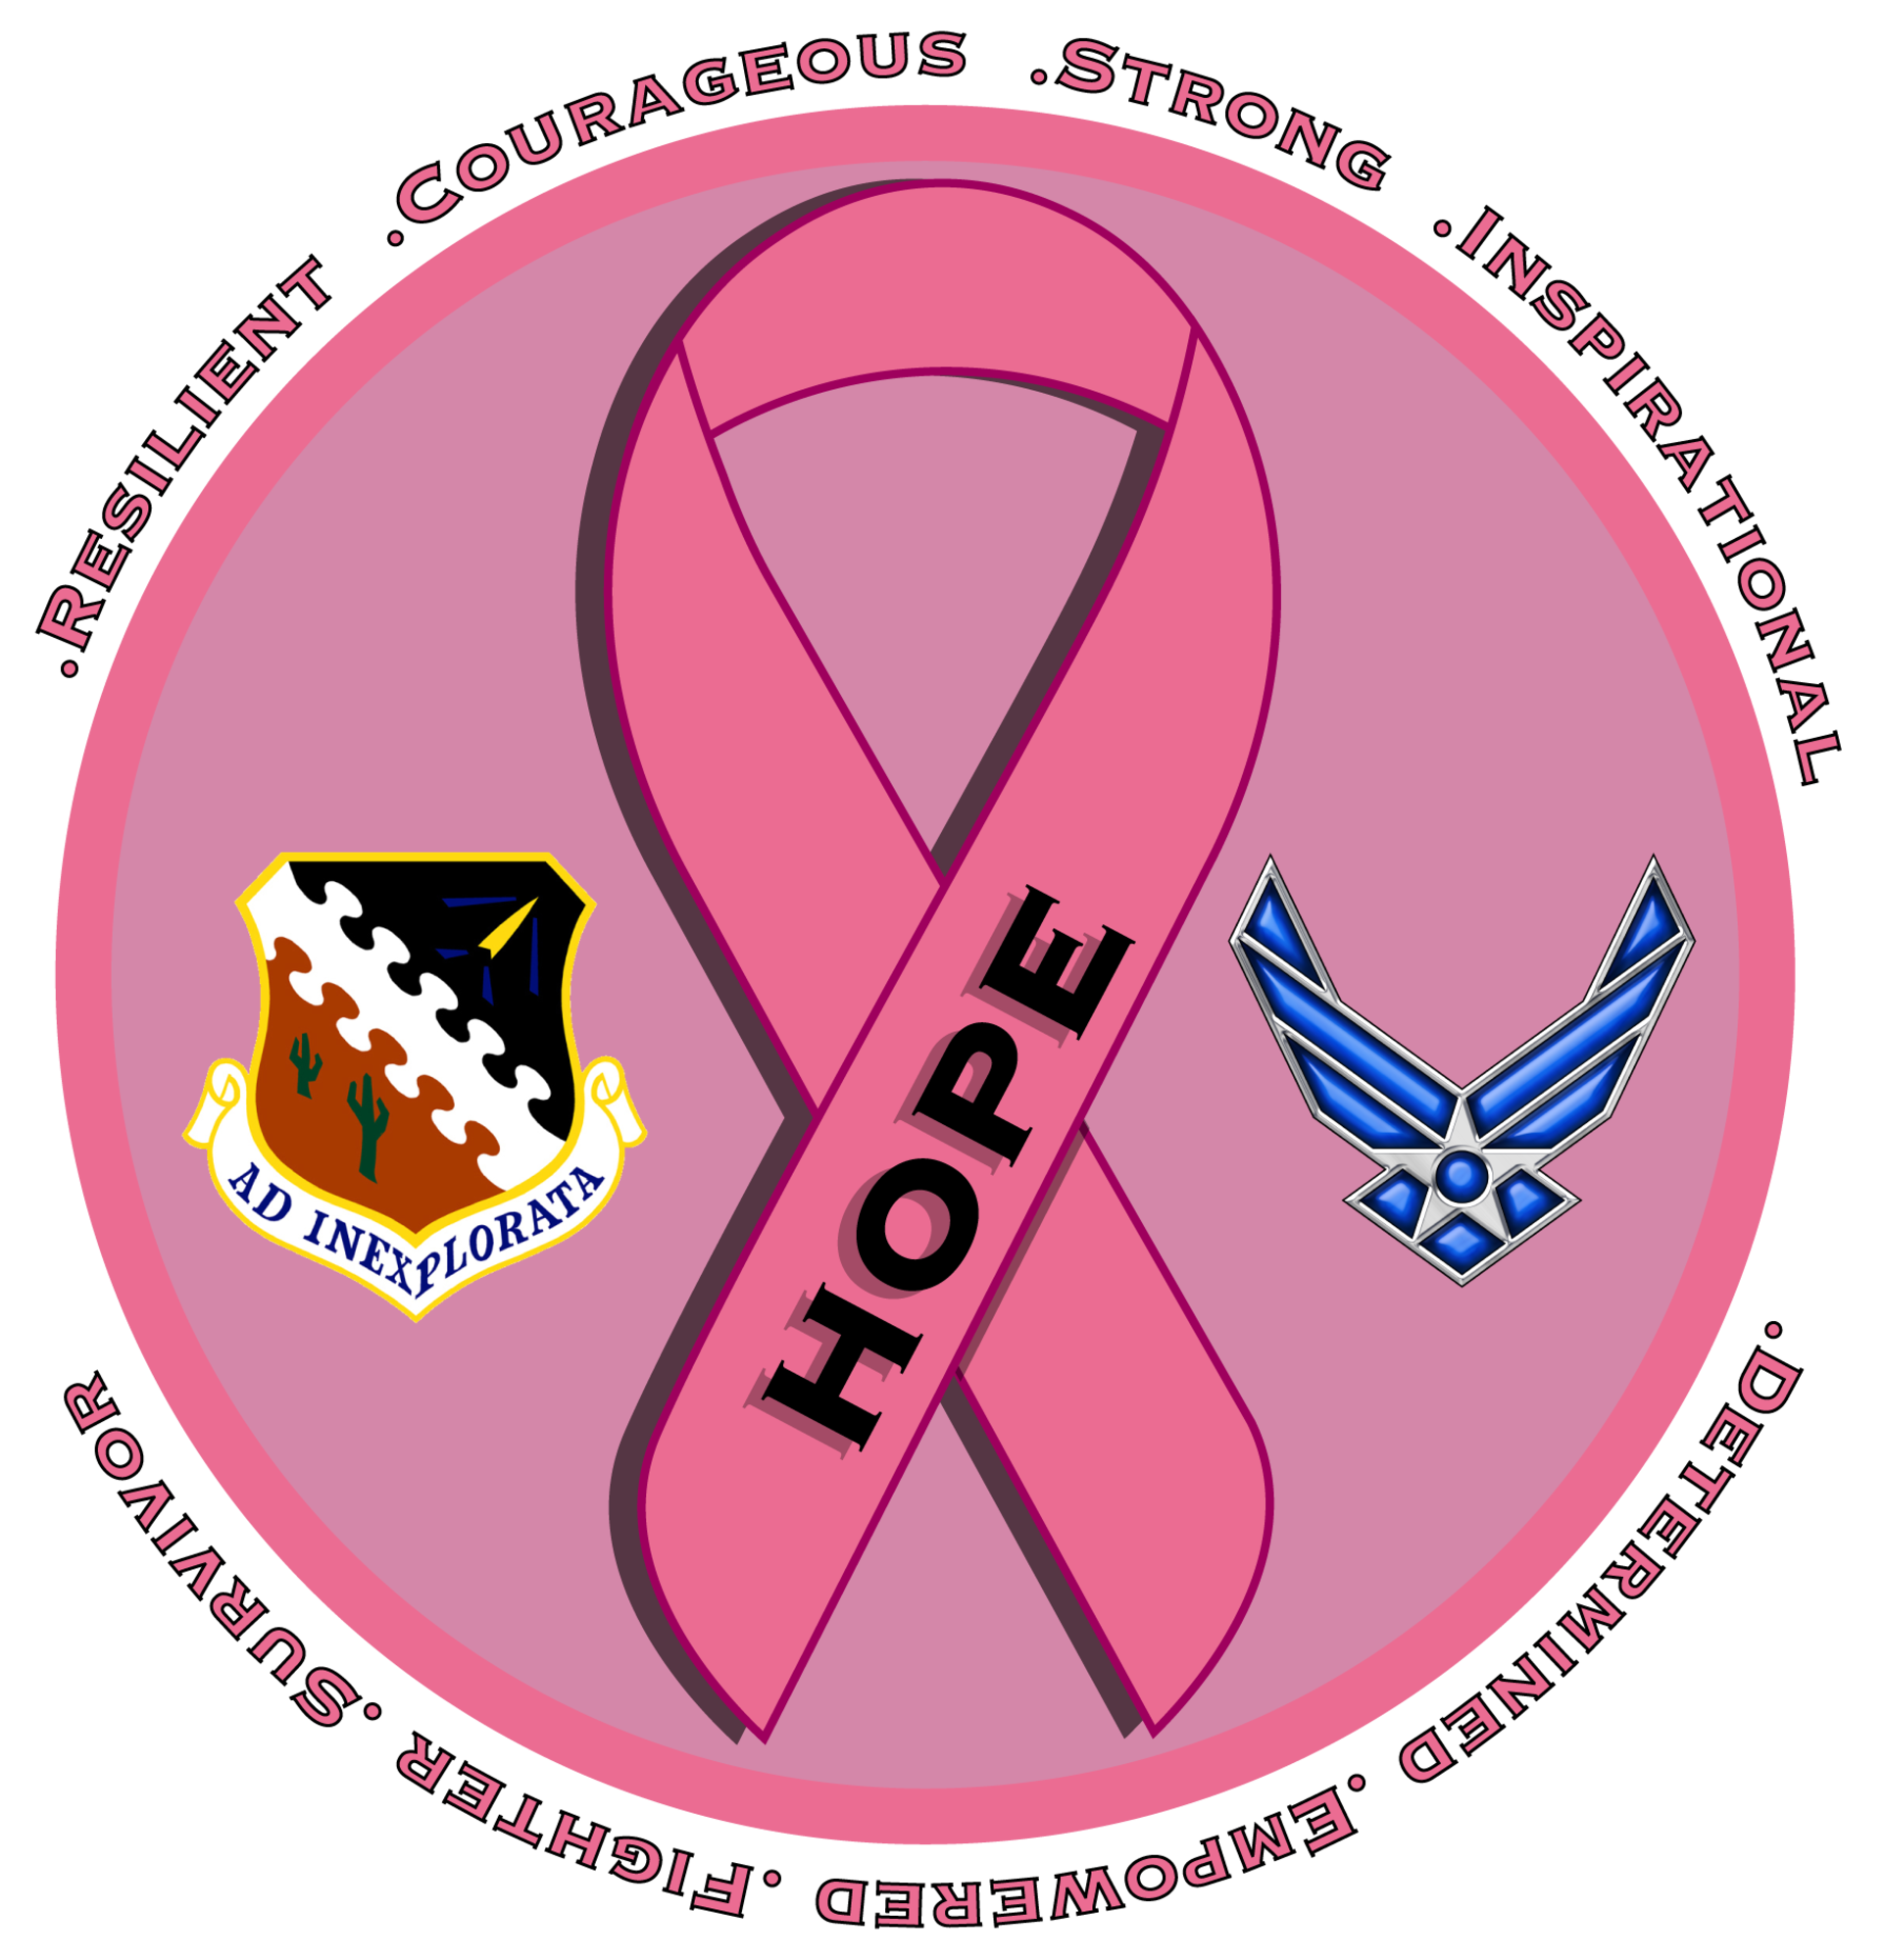 A pink breast cancer awareness logo graphic